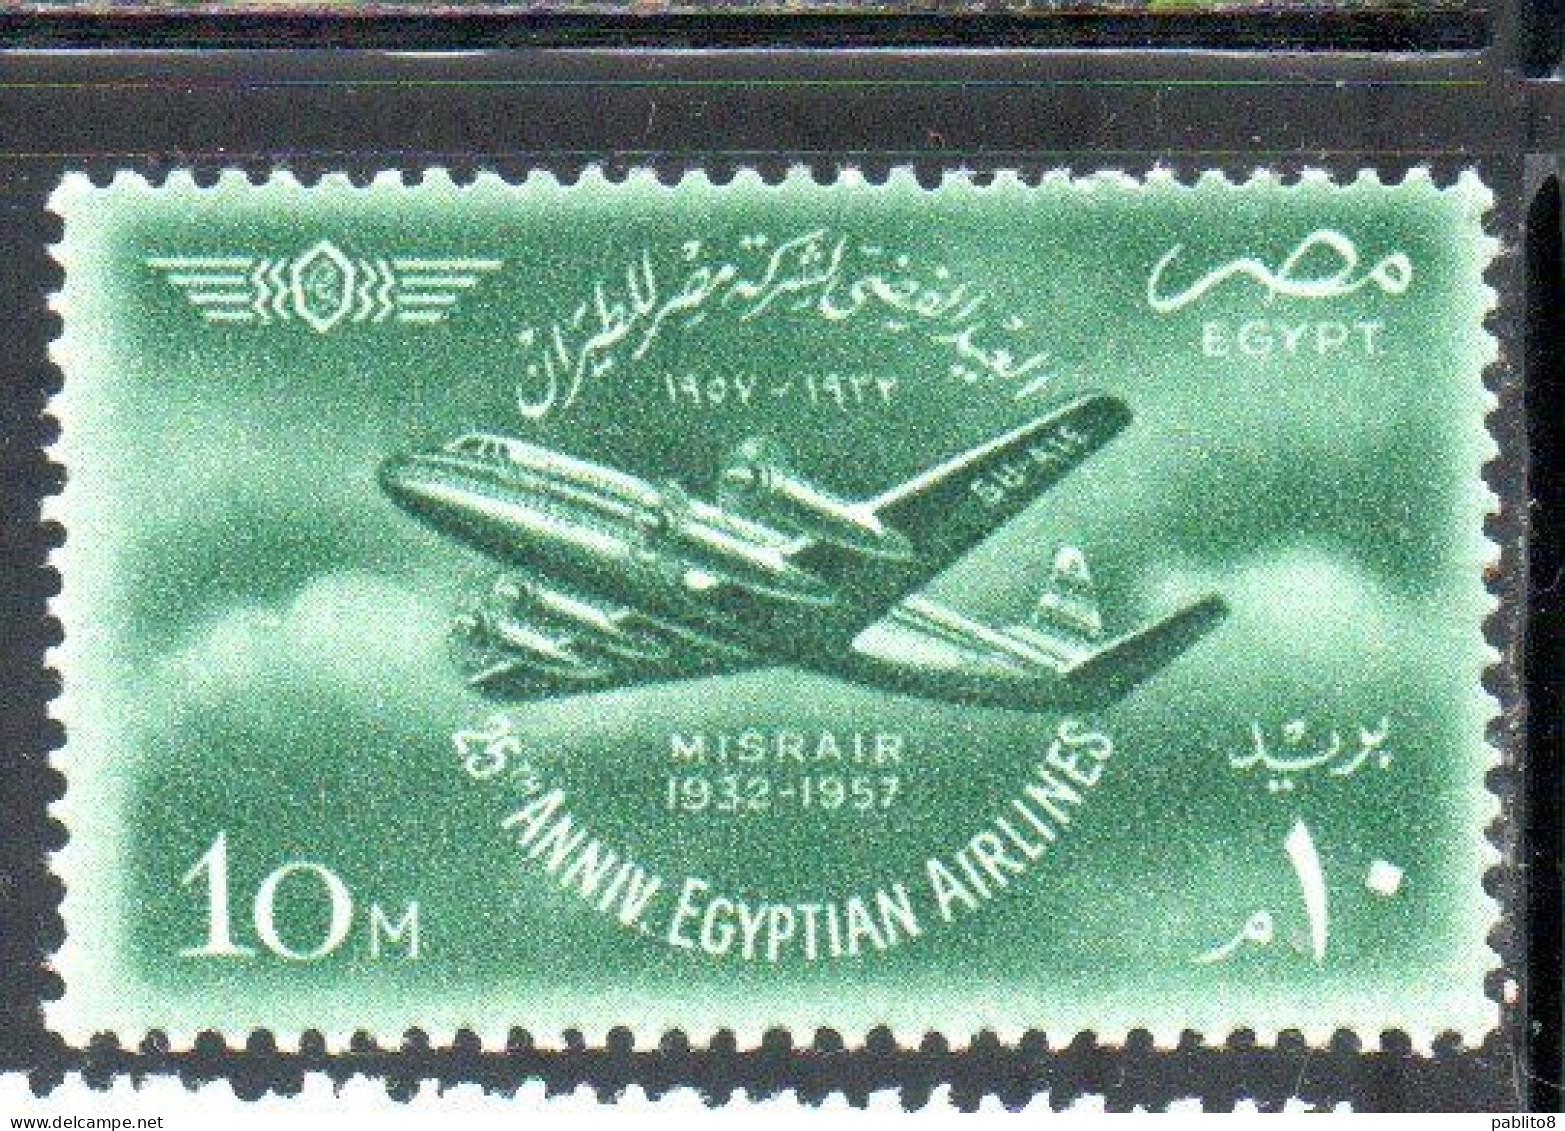 UAR EGYPT EGITTO 1957 EGYPTIAN AIR FORCE AND OF MISRAIR AIRLINE VISCOUNT PLANE 10m MNH - Nuovi